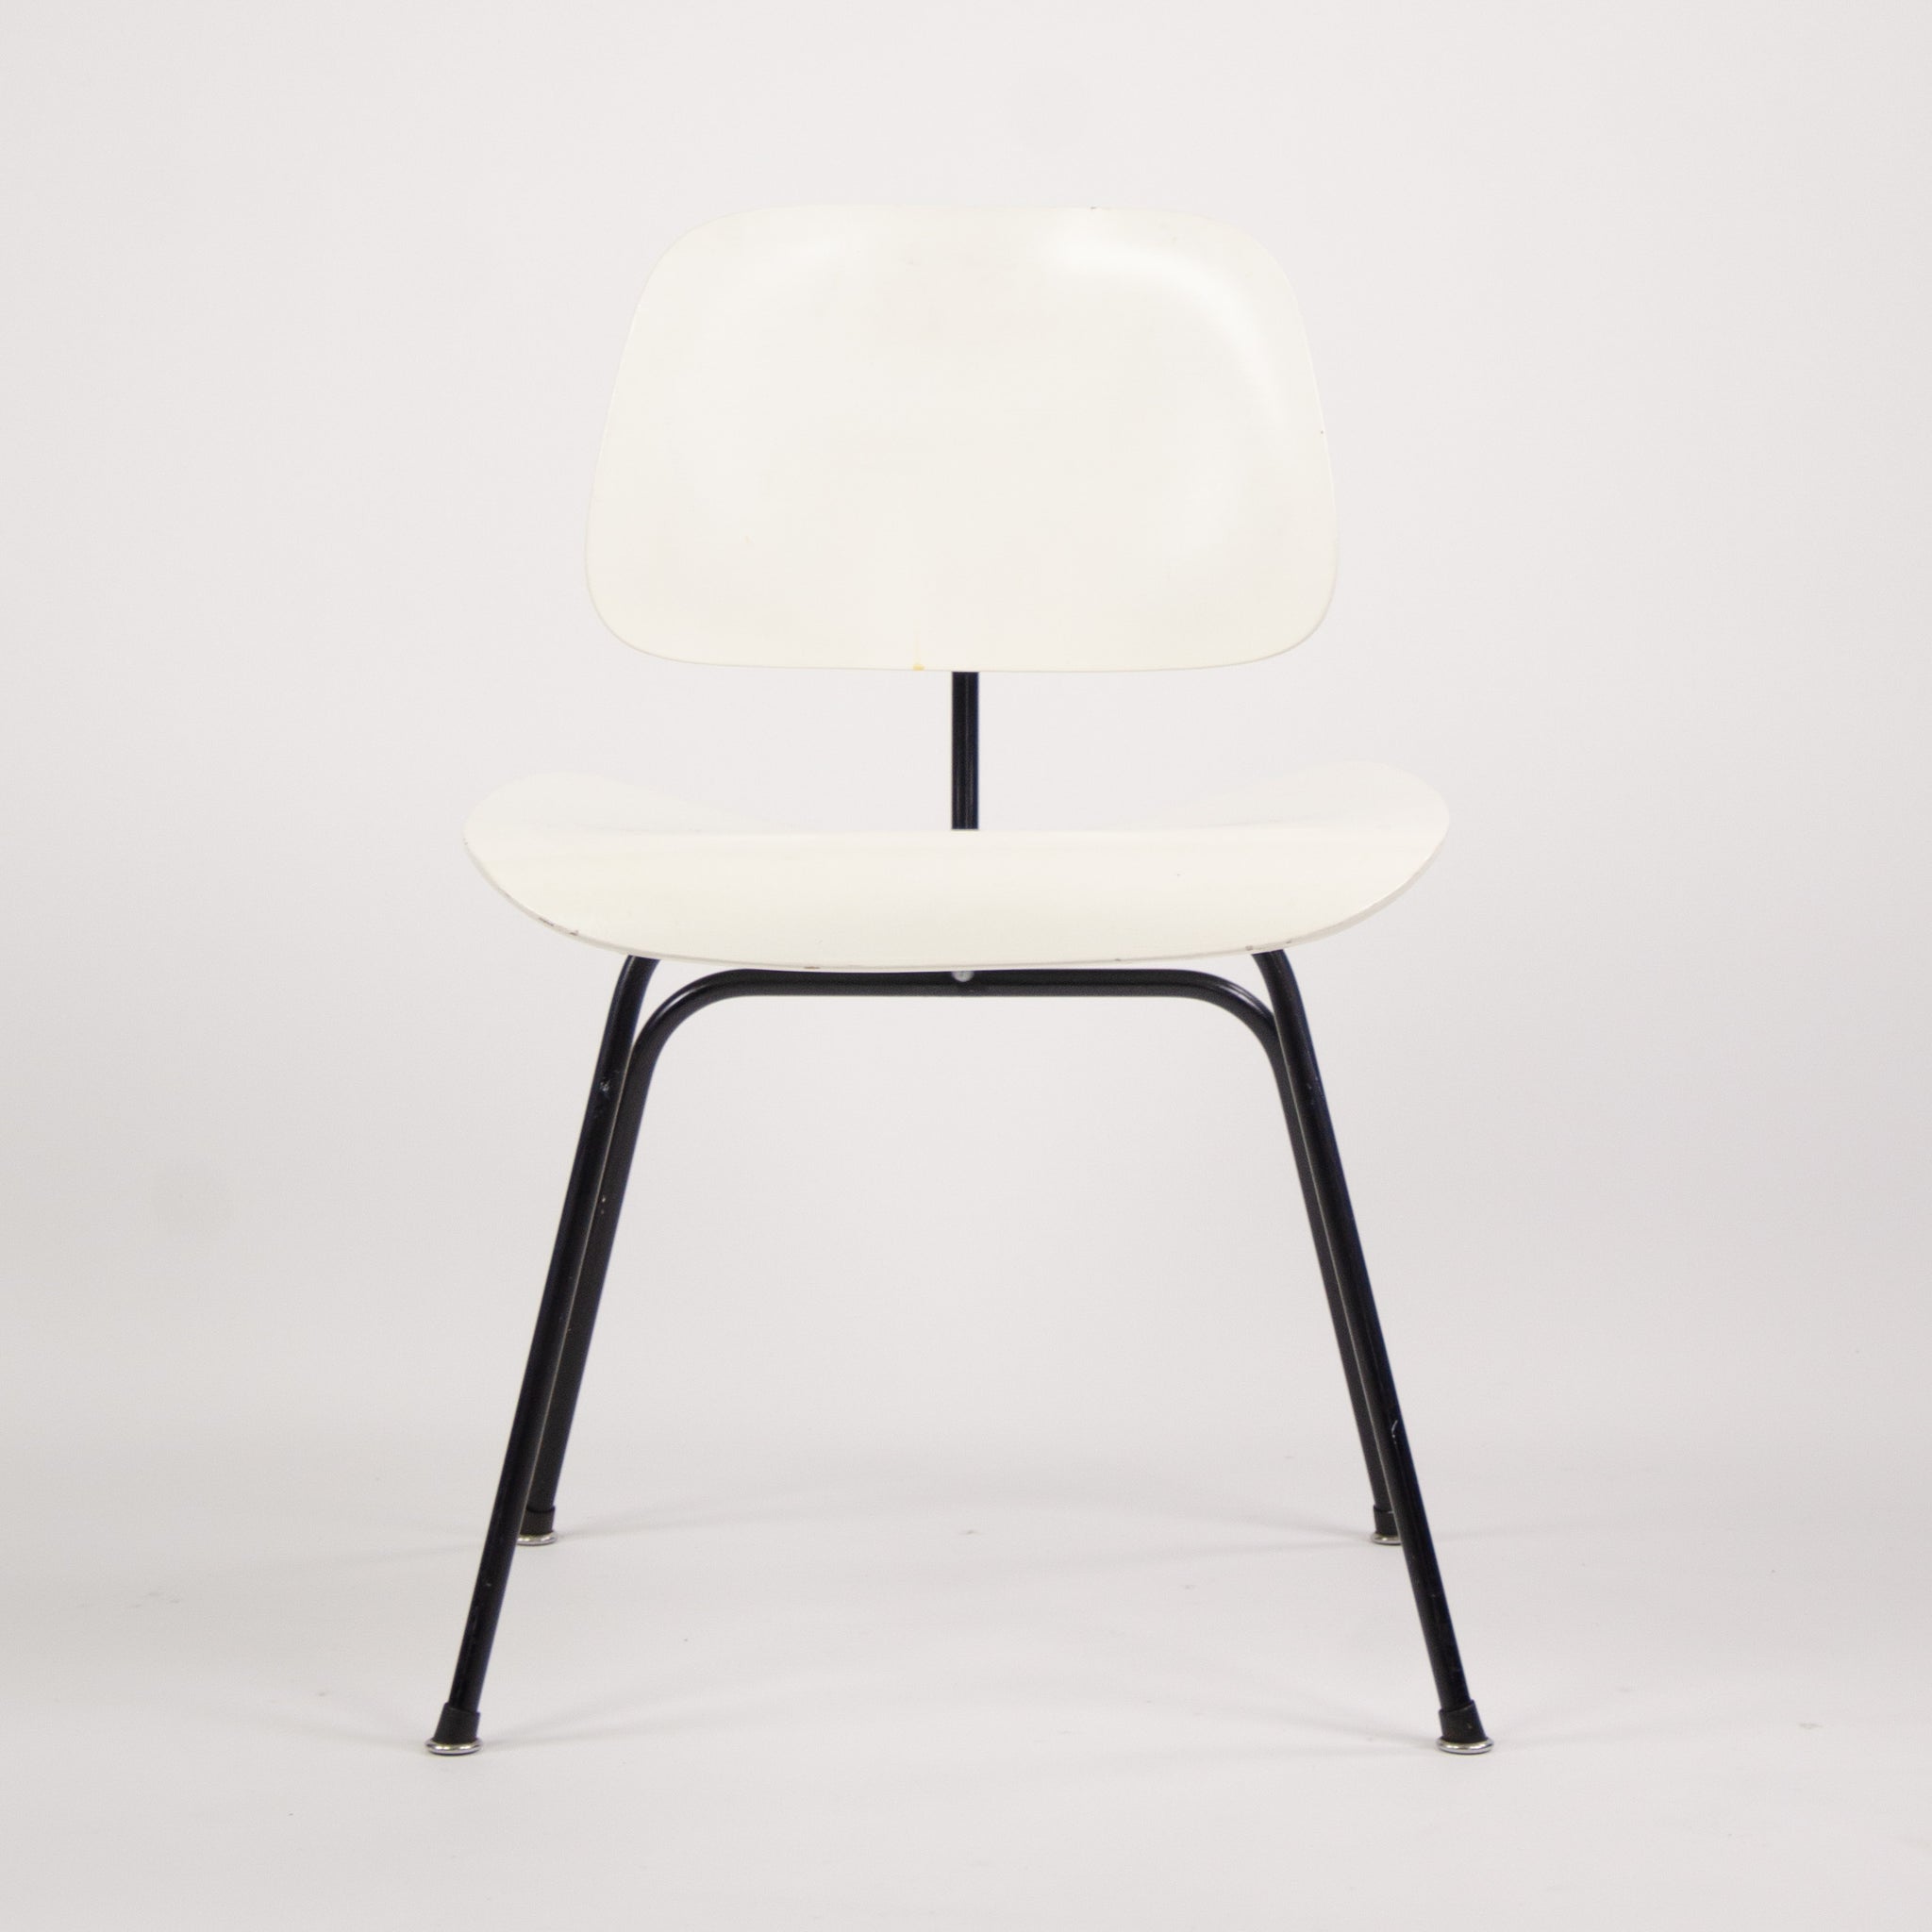 SOLD Herman Miller Eames 1954 DCM Dining Chair Restored White Boot Glides